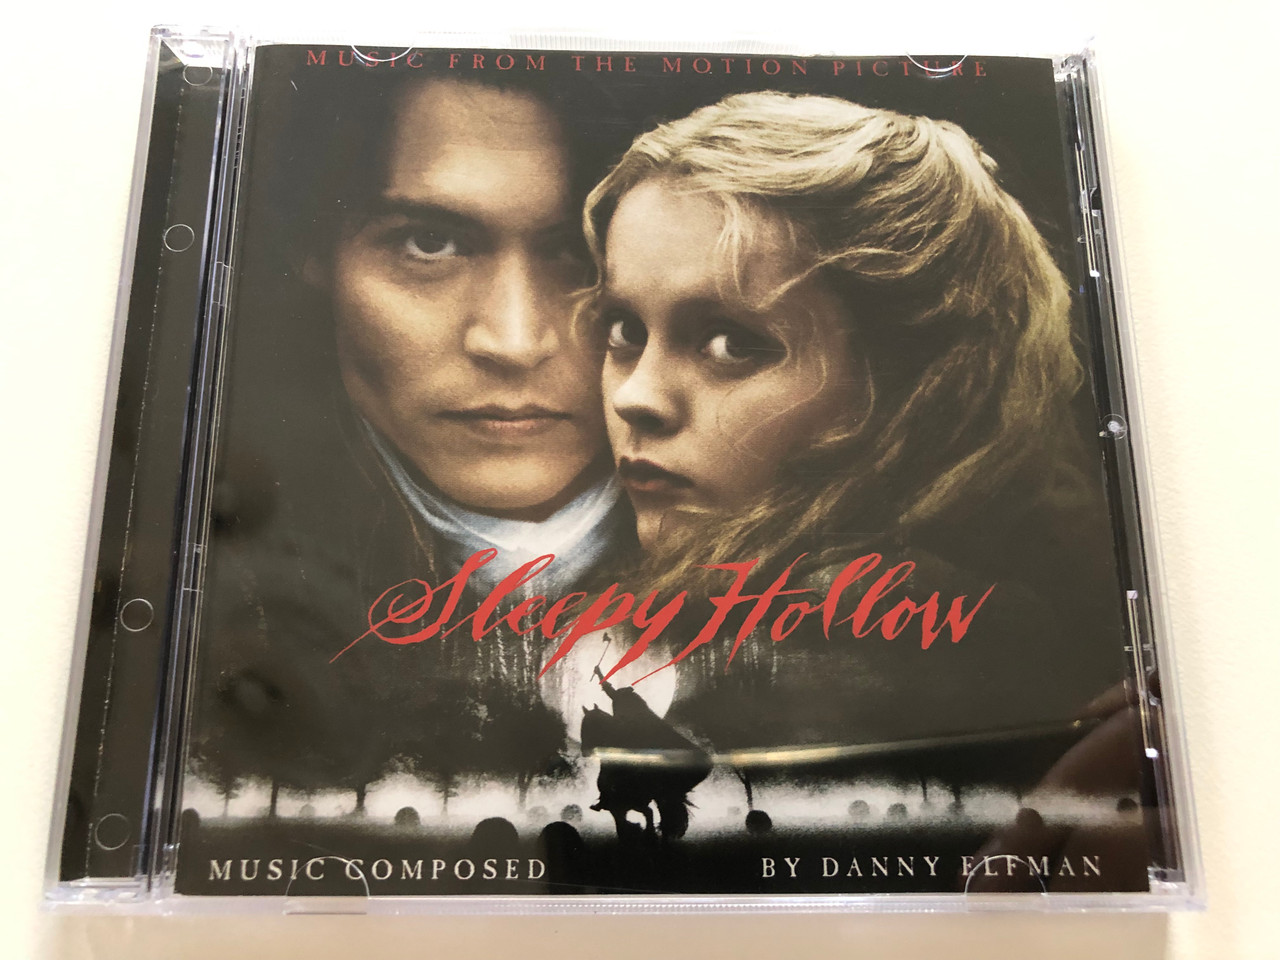 https://cdn10.bigcommerce.com/s-62bdpkt7pb/products/31148/images/183380/Sleepy_Hollow_Music_From_The_Motion_Picture_Music_Composed_By_Danny_Elfman_Hollywood_Records_Audio_CD_1999_0122622HWR_1__85731.1625501835.1280.1280.JPG?c=2